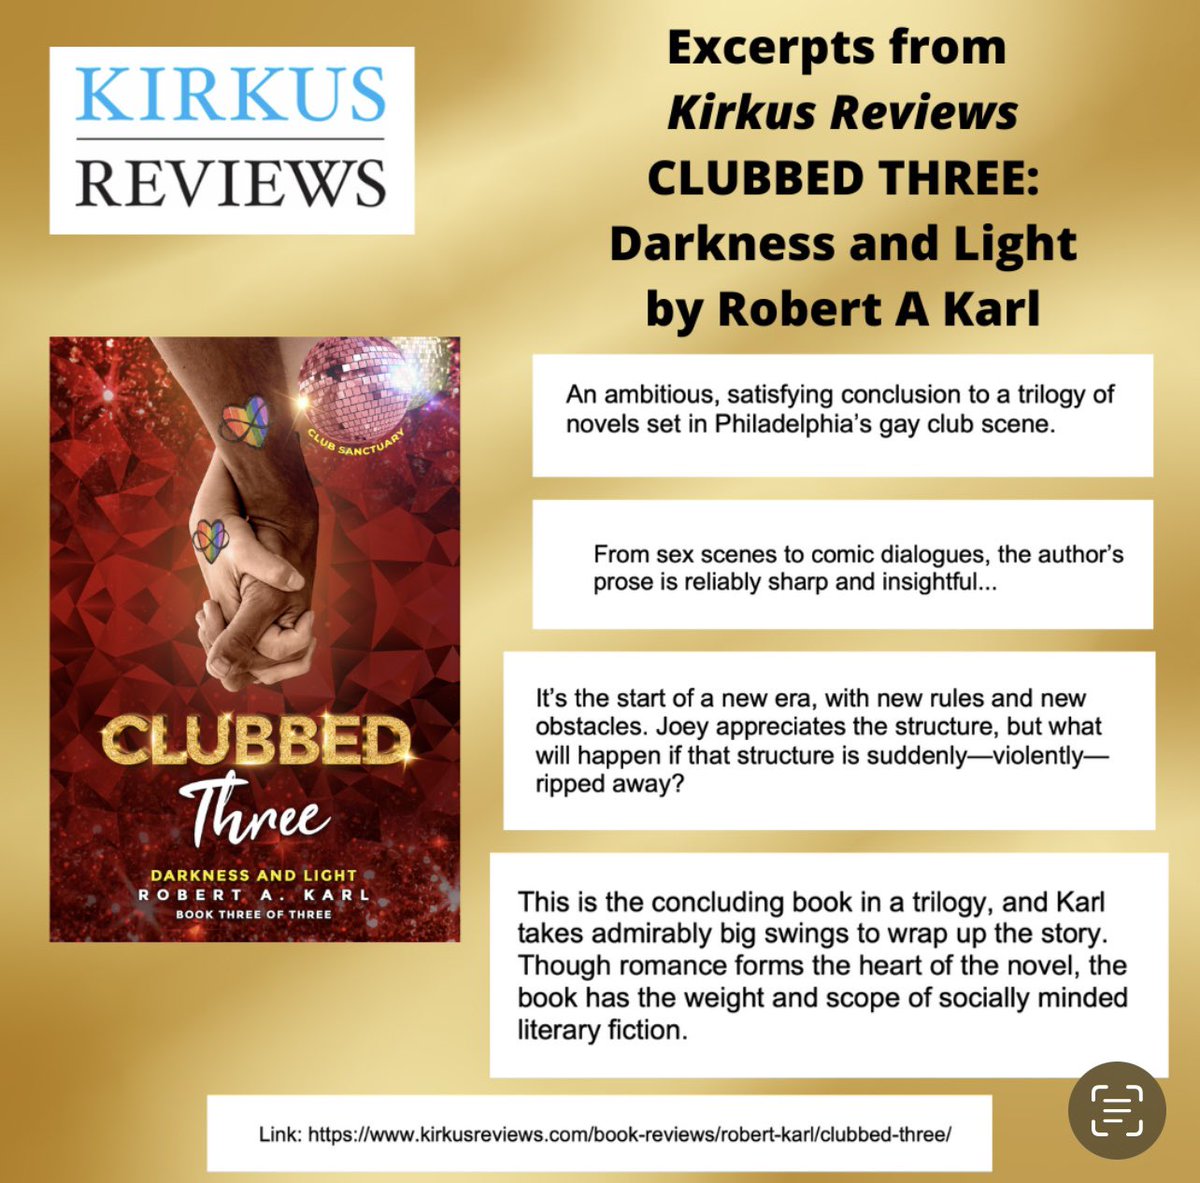 The verdict from Kirkus Reviews is: Get it! CLUBBED THREE: Darkness and Light by Robert A Karl. “The author’s prose is reliably sharp and insightful…” #gaybooks #gayfiction #indieauthor #mmfiction #gaynovel